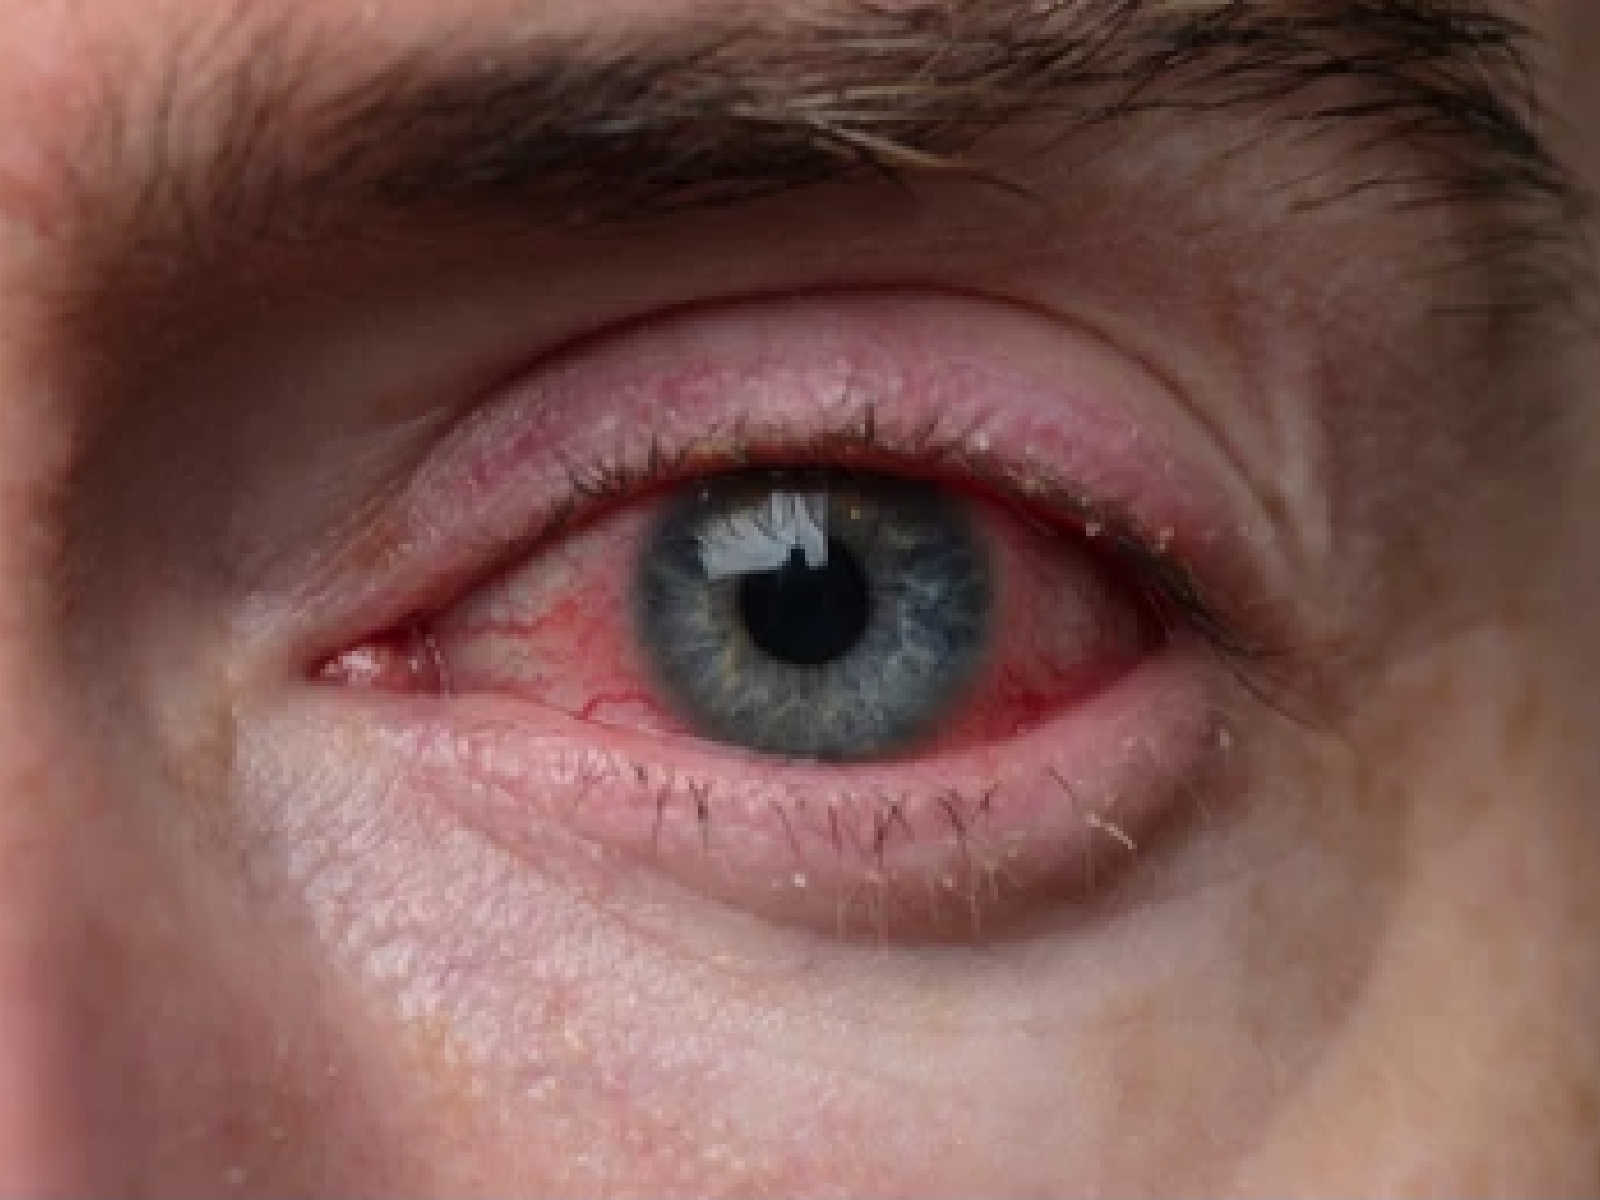 Close-up photo of a human eye with inflammation of the eyelids.